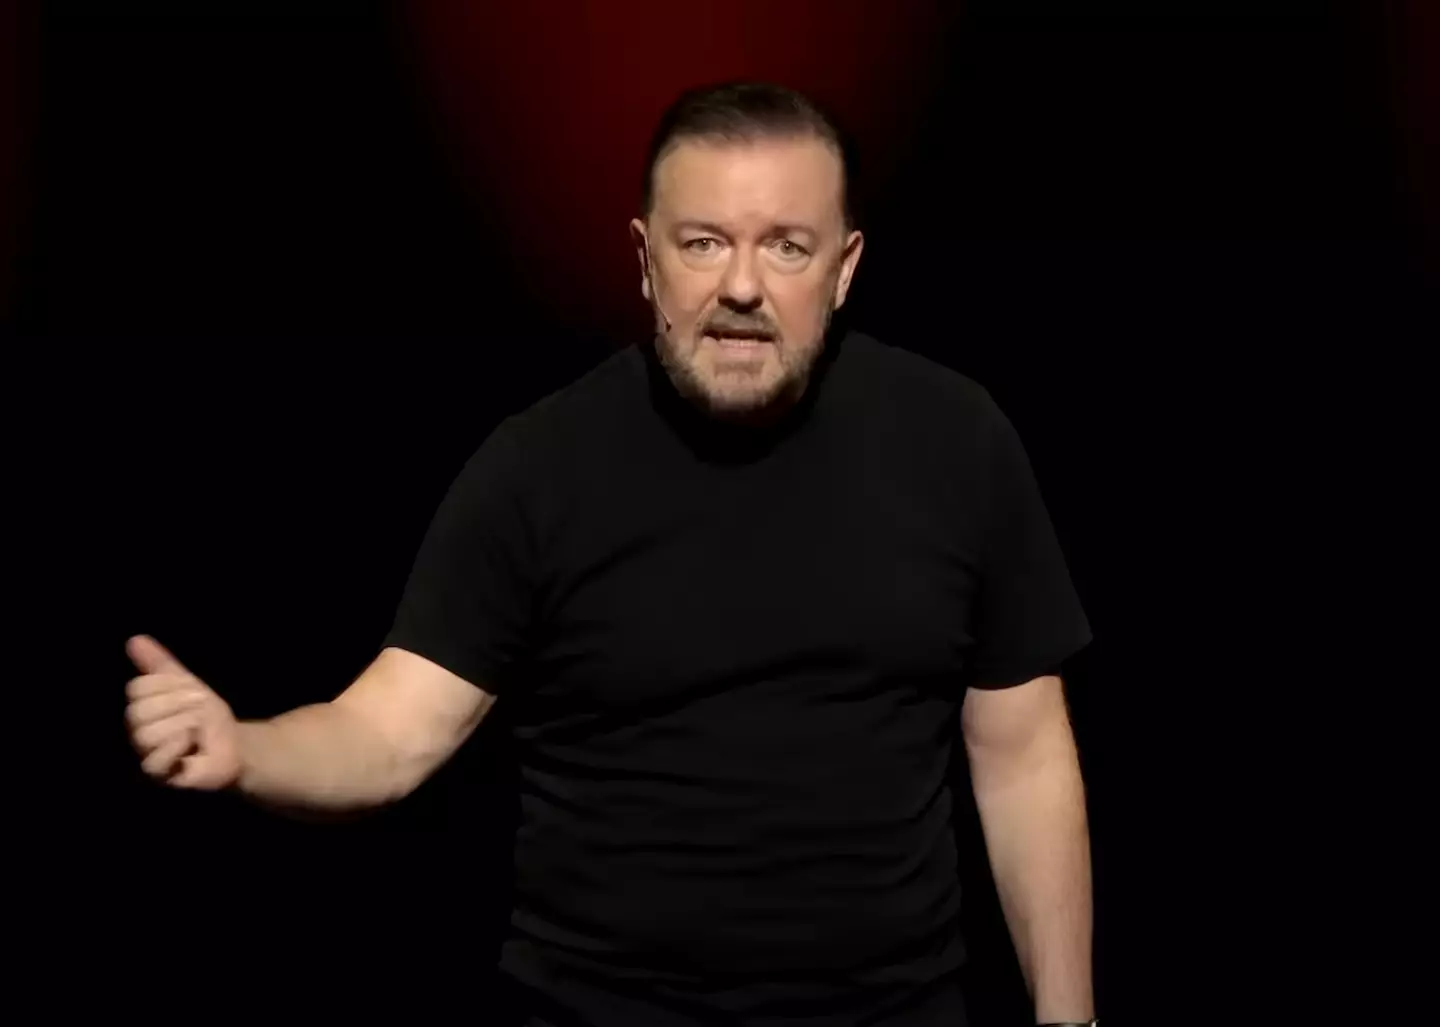 One viewer questioned what's going through Gervais' head in the special.